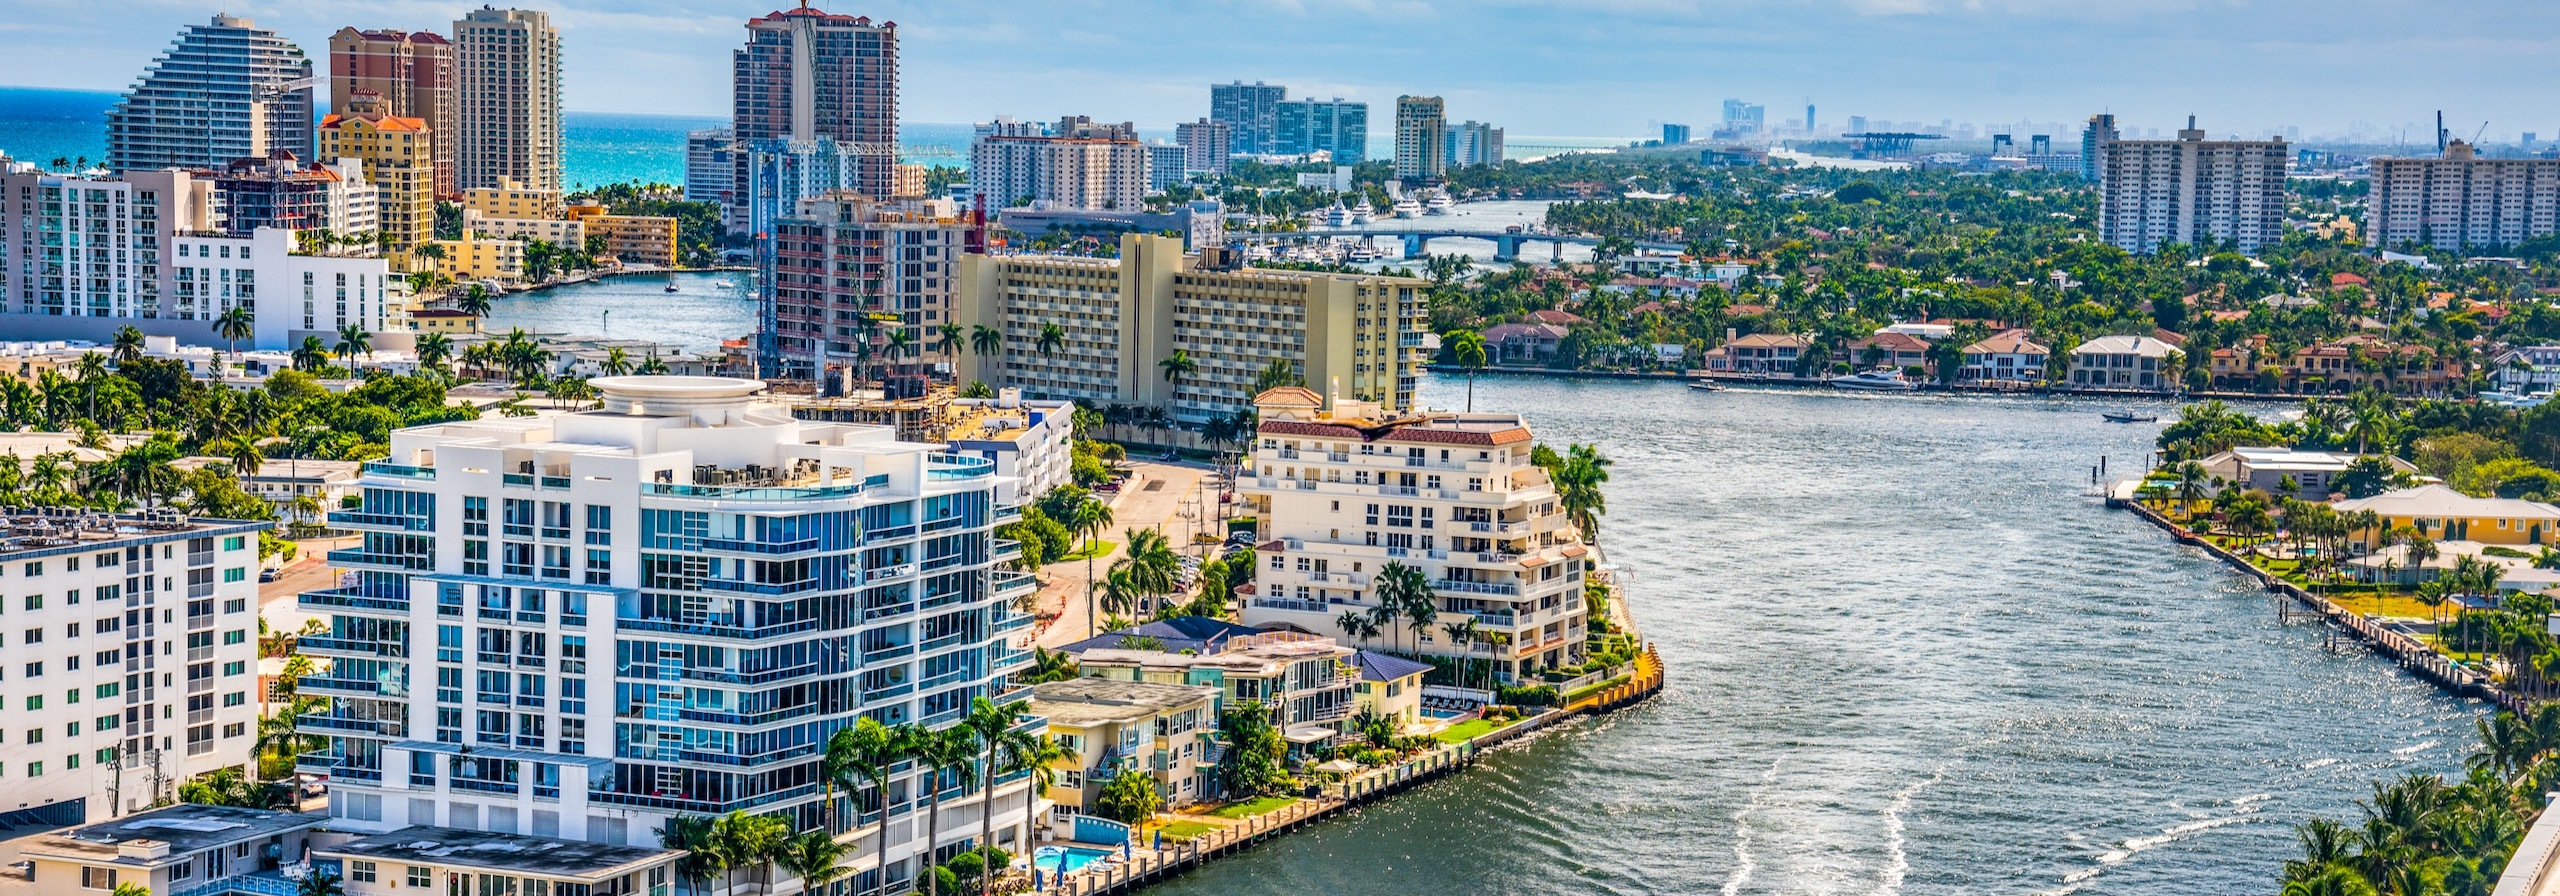 Modern Condos For Sale Fort Lauderdale | Modern Luxury Condos For Sale Las Olas